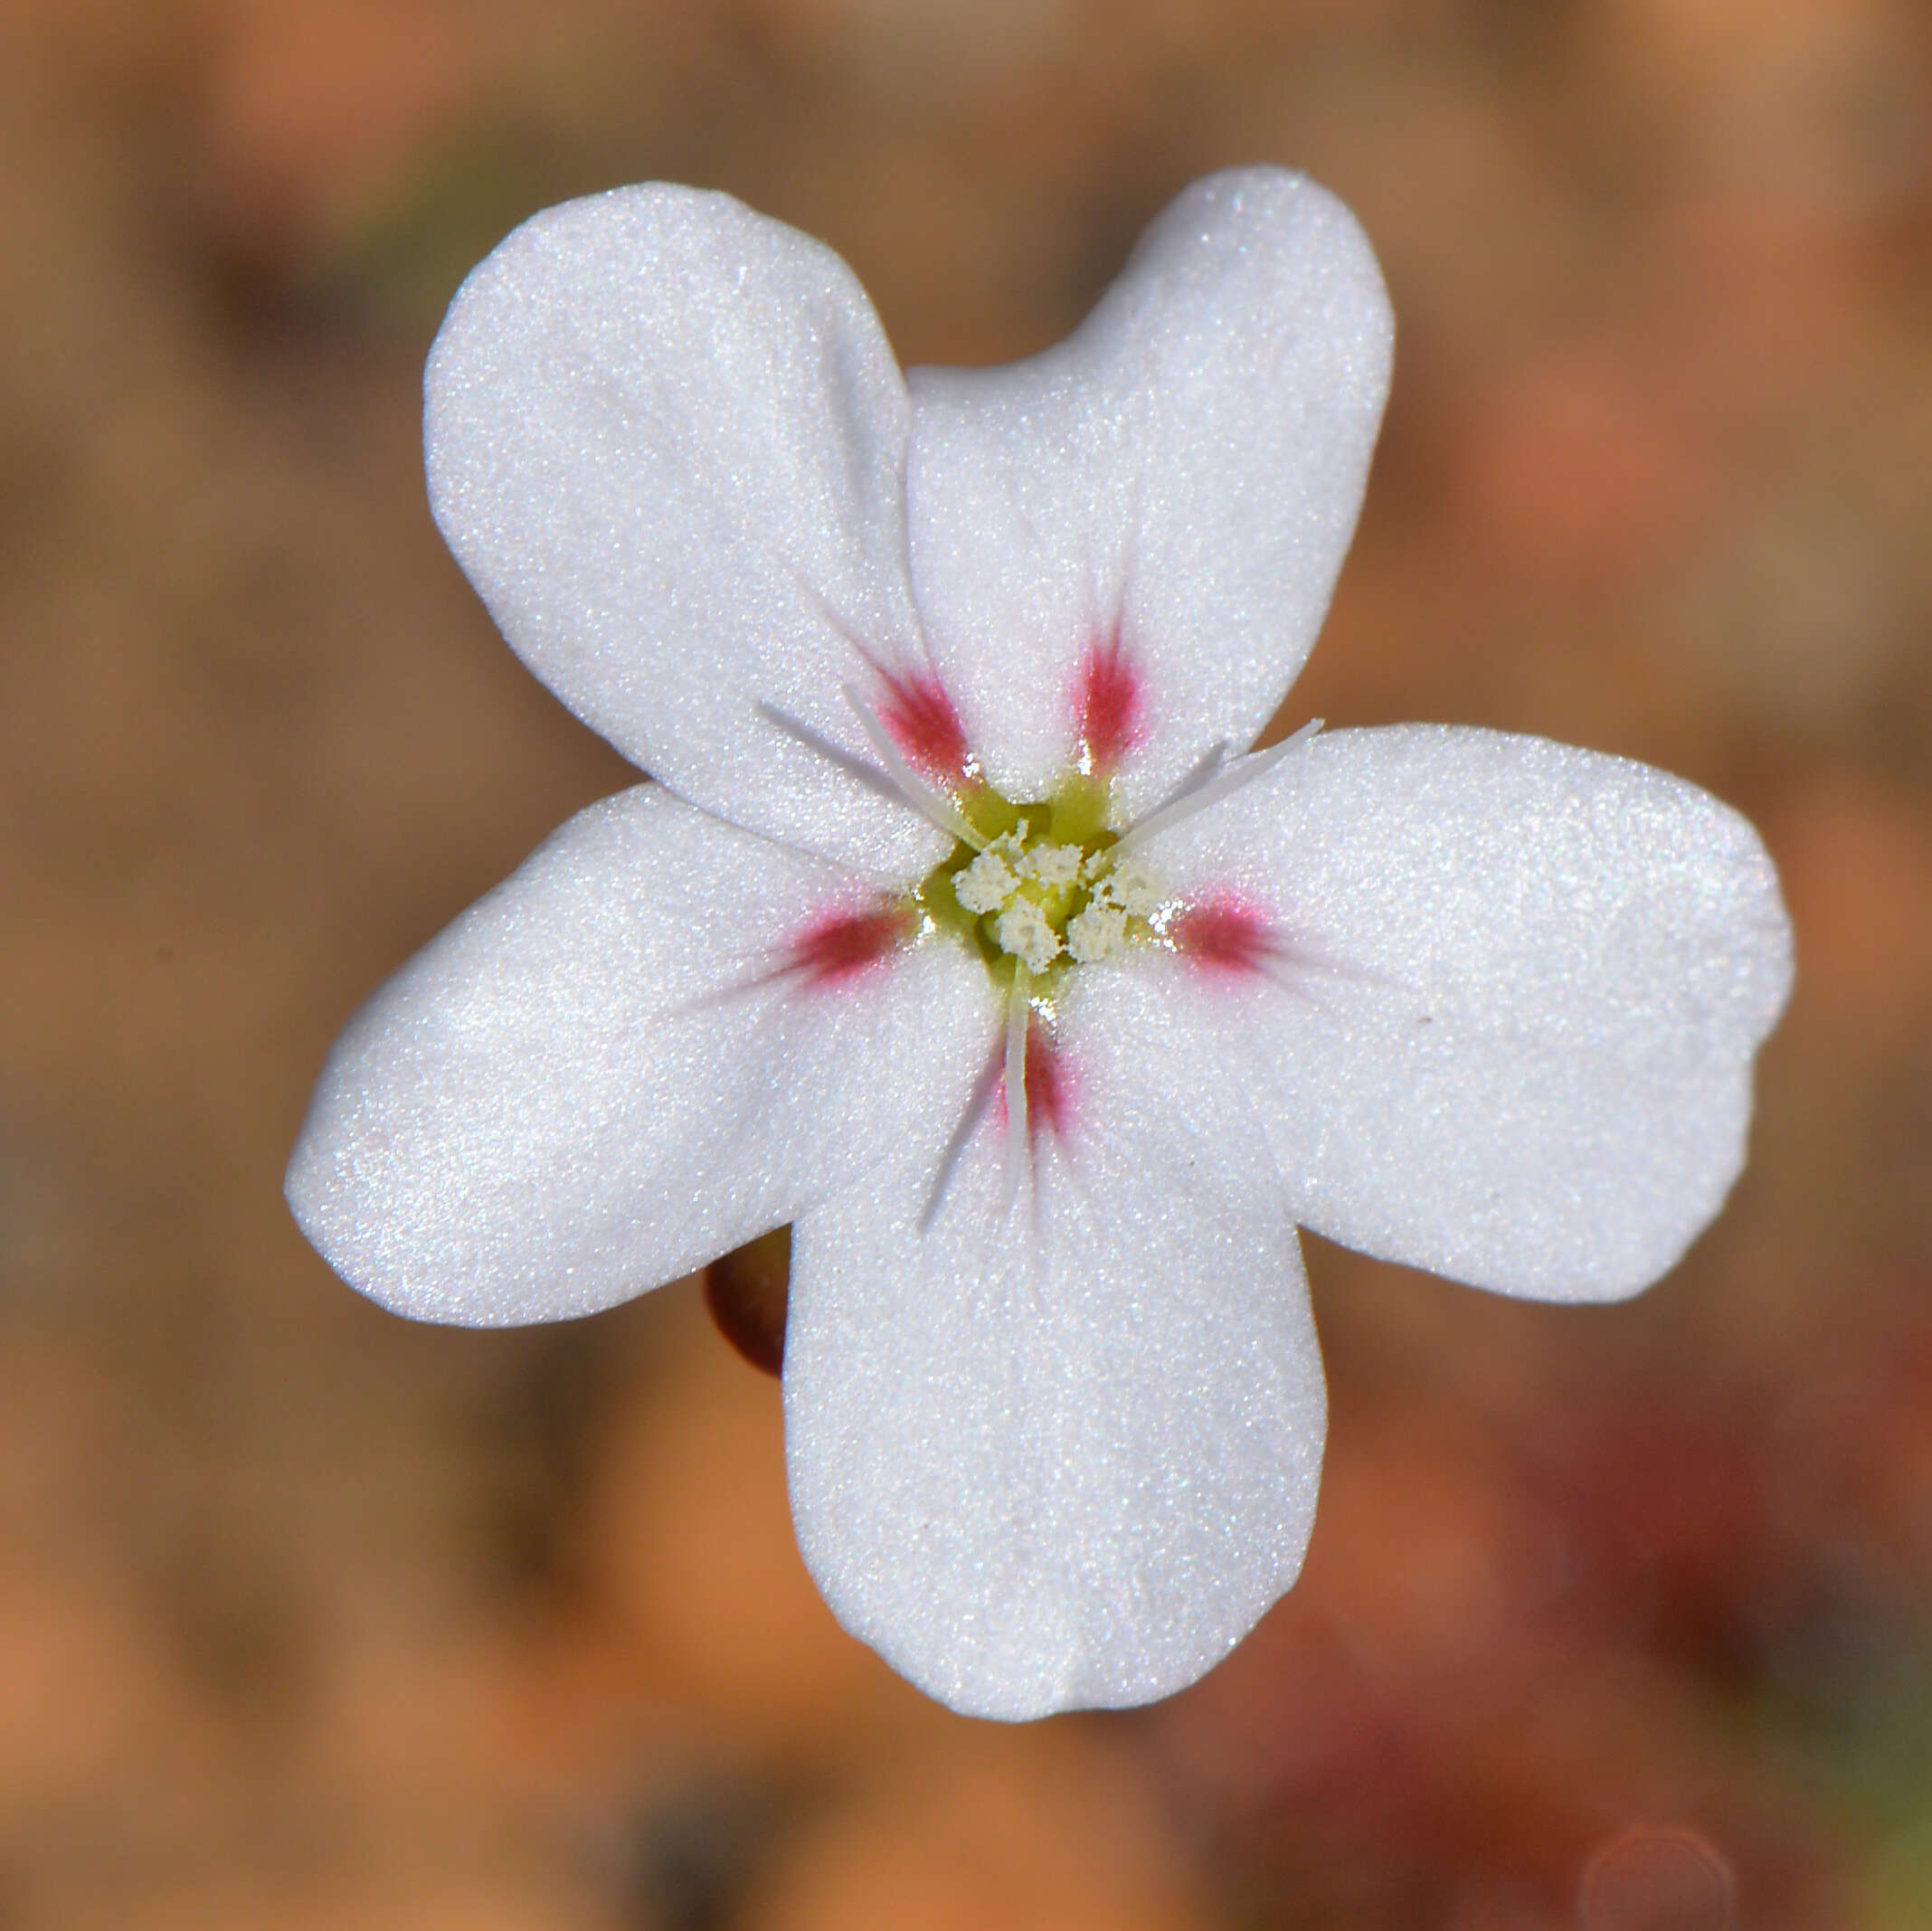 Image of Drosera spilos N. Marchant & Lowrie